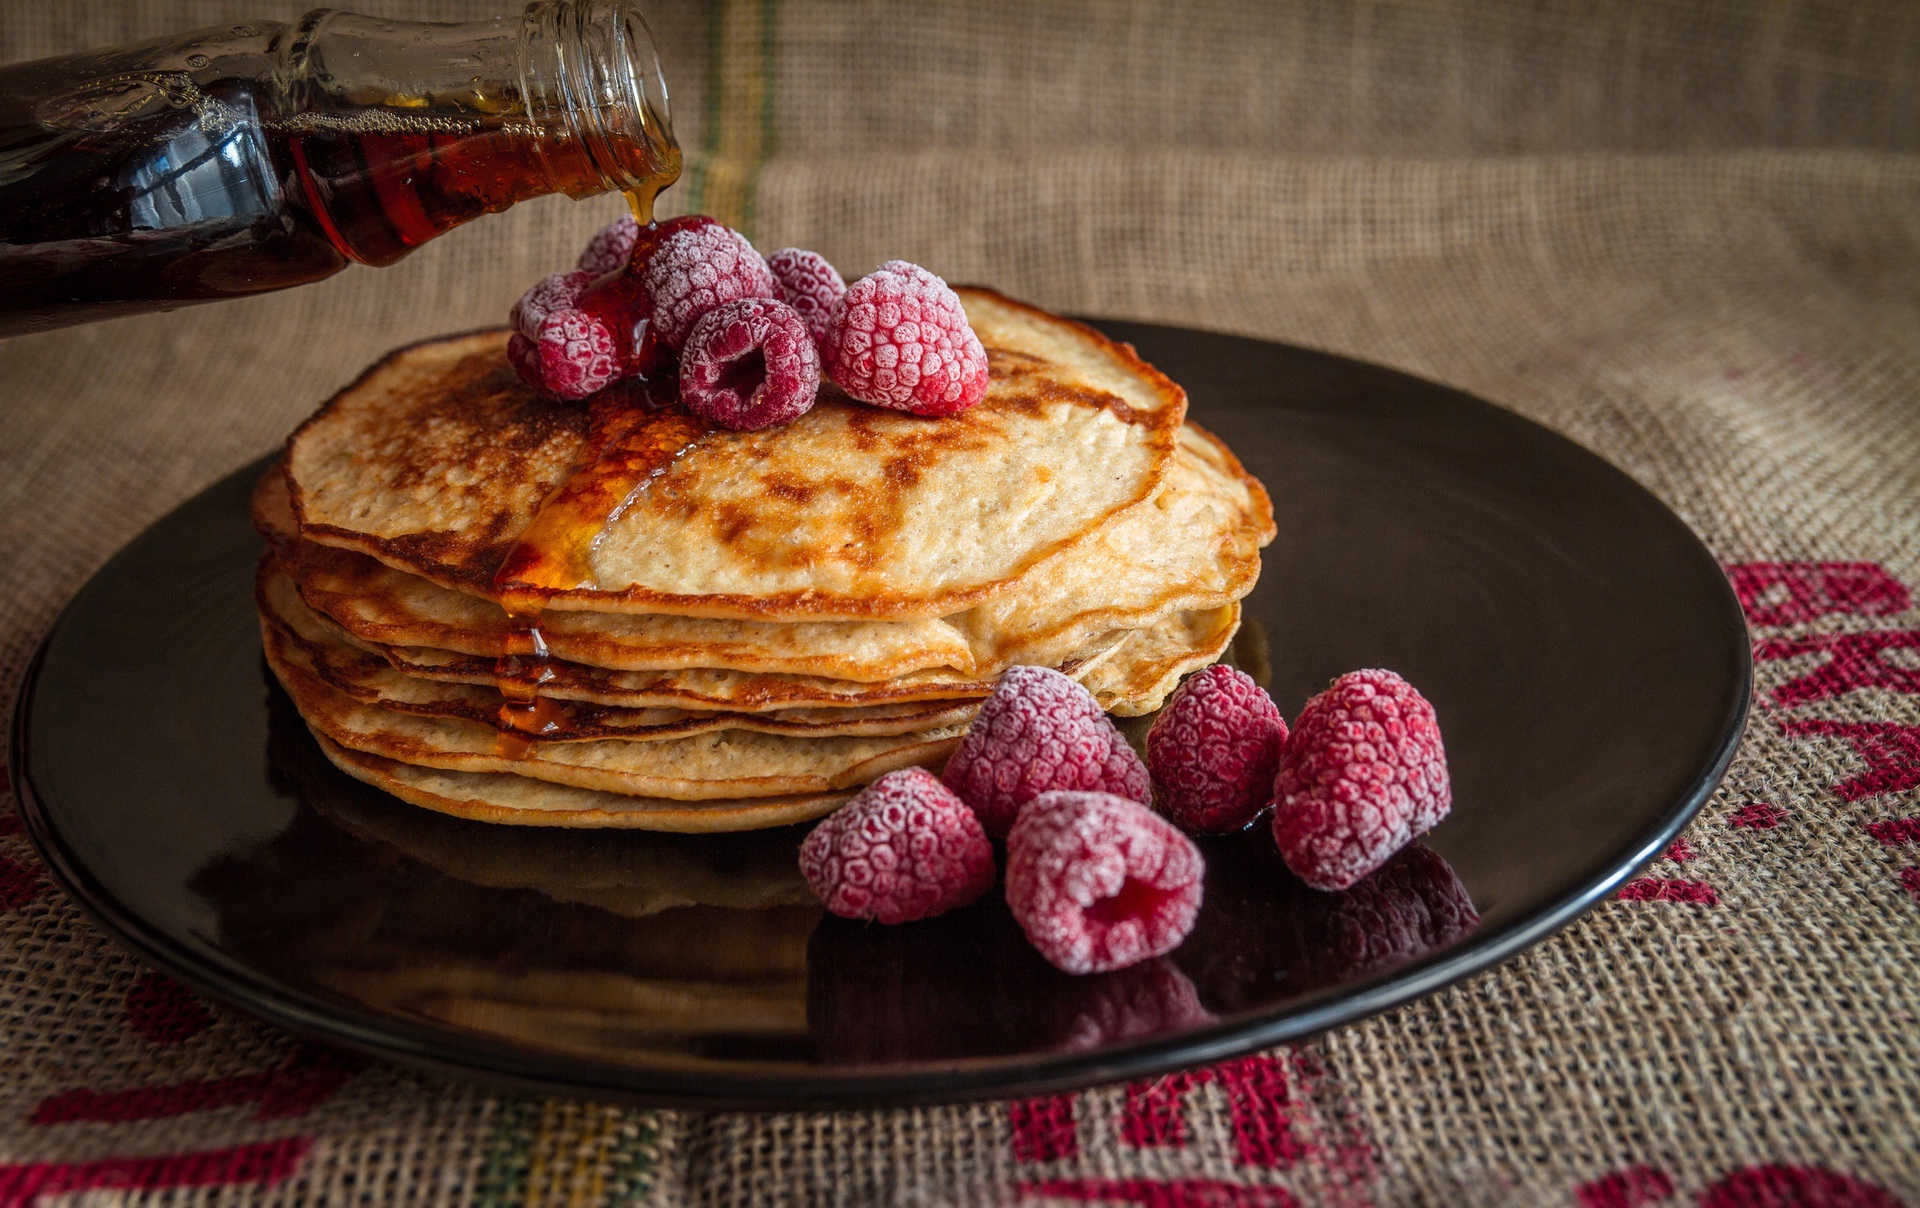 Maple syrup being poured on stack of pancakes with raspberries